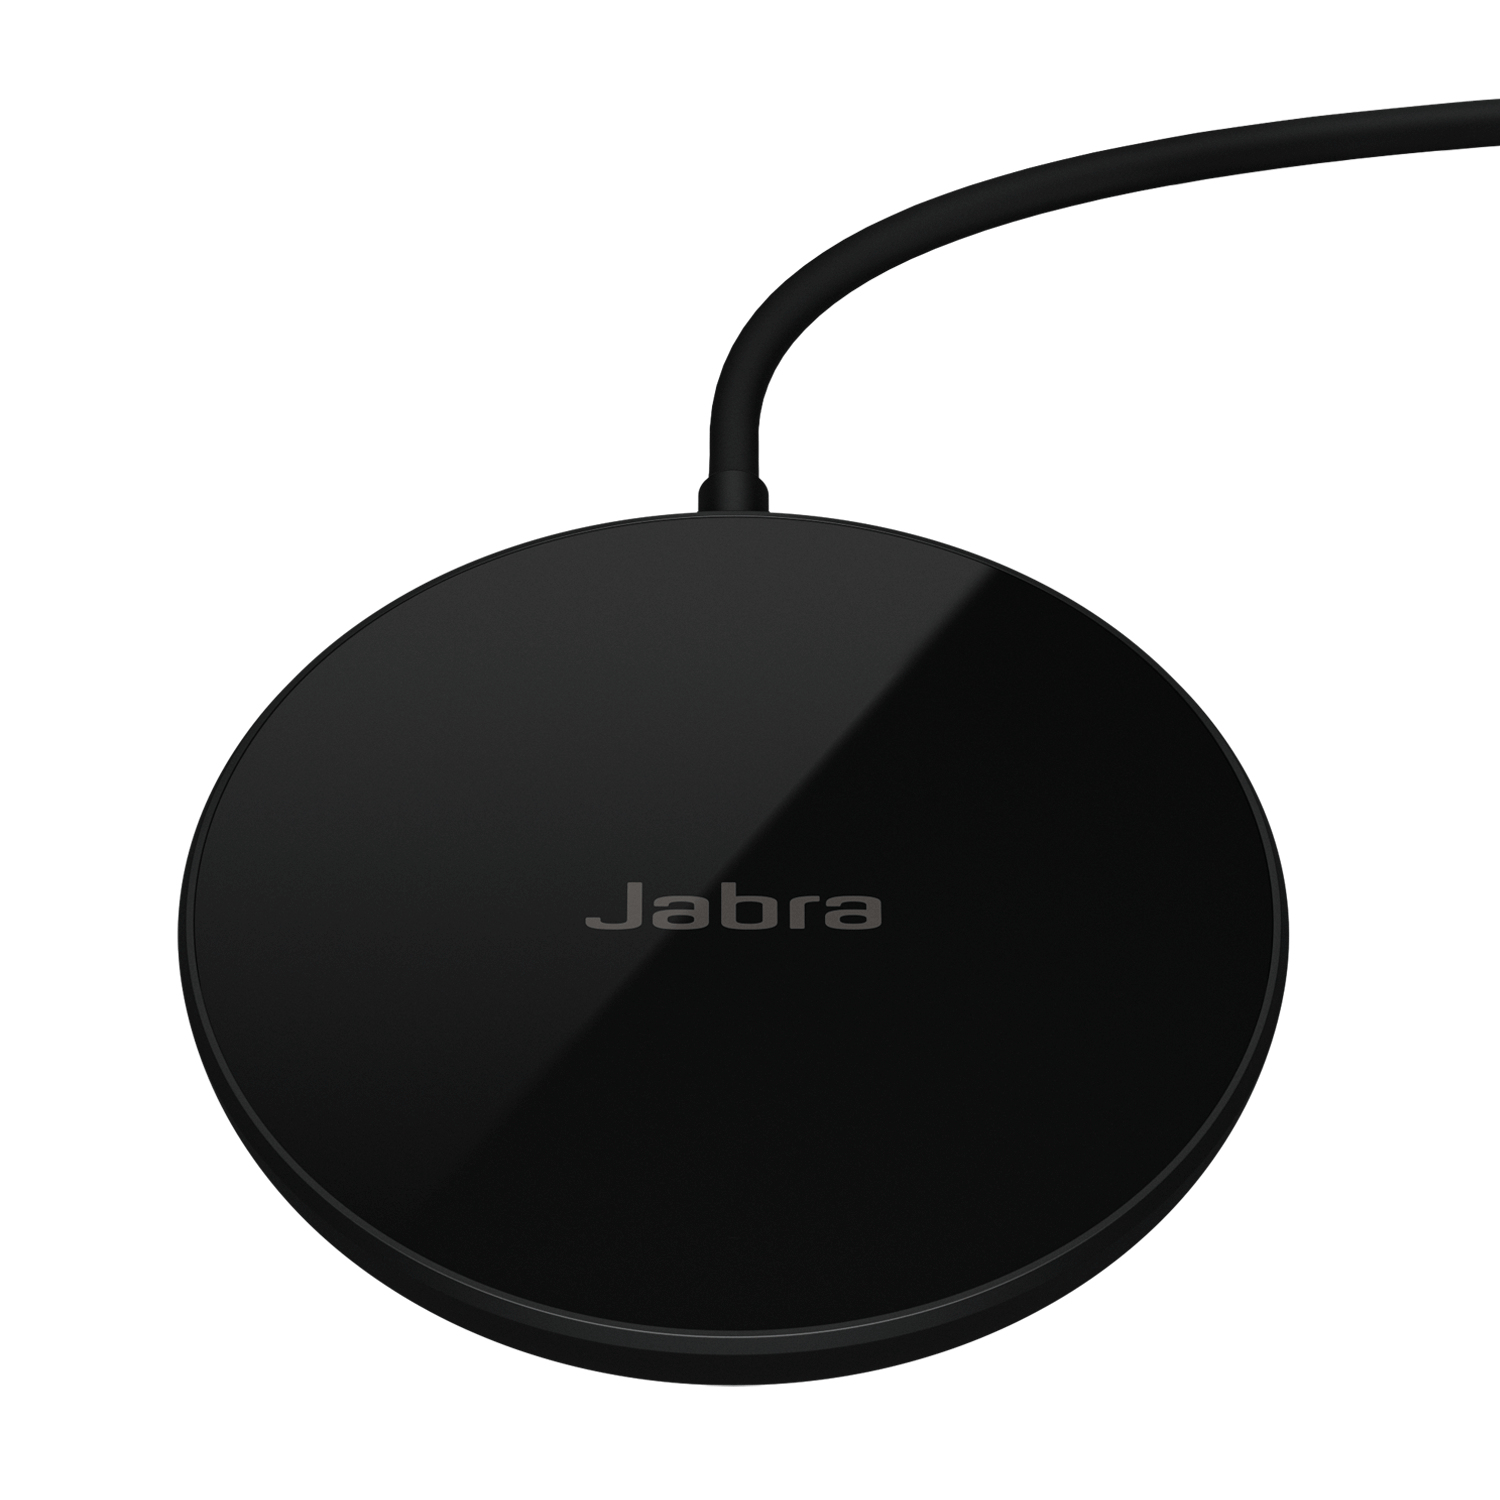 Photos - Charger Jabra Wireless Charging Pad 14207-92